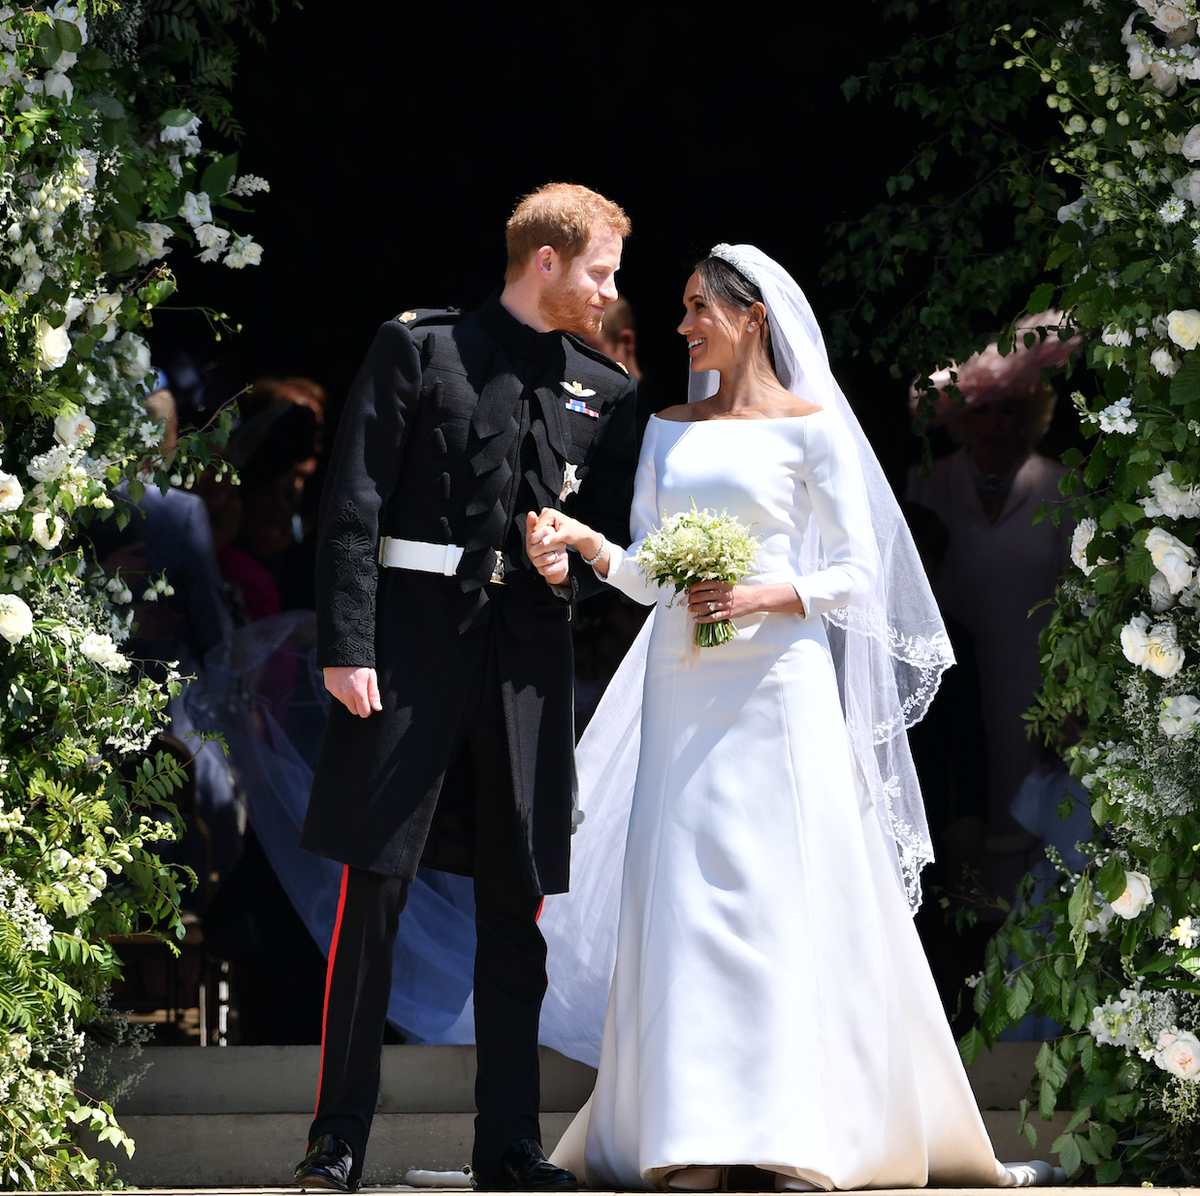 This is most likely the wedding dress designer Meghan Markle chose